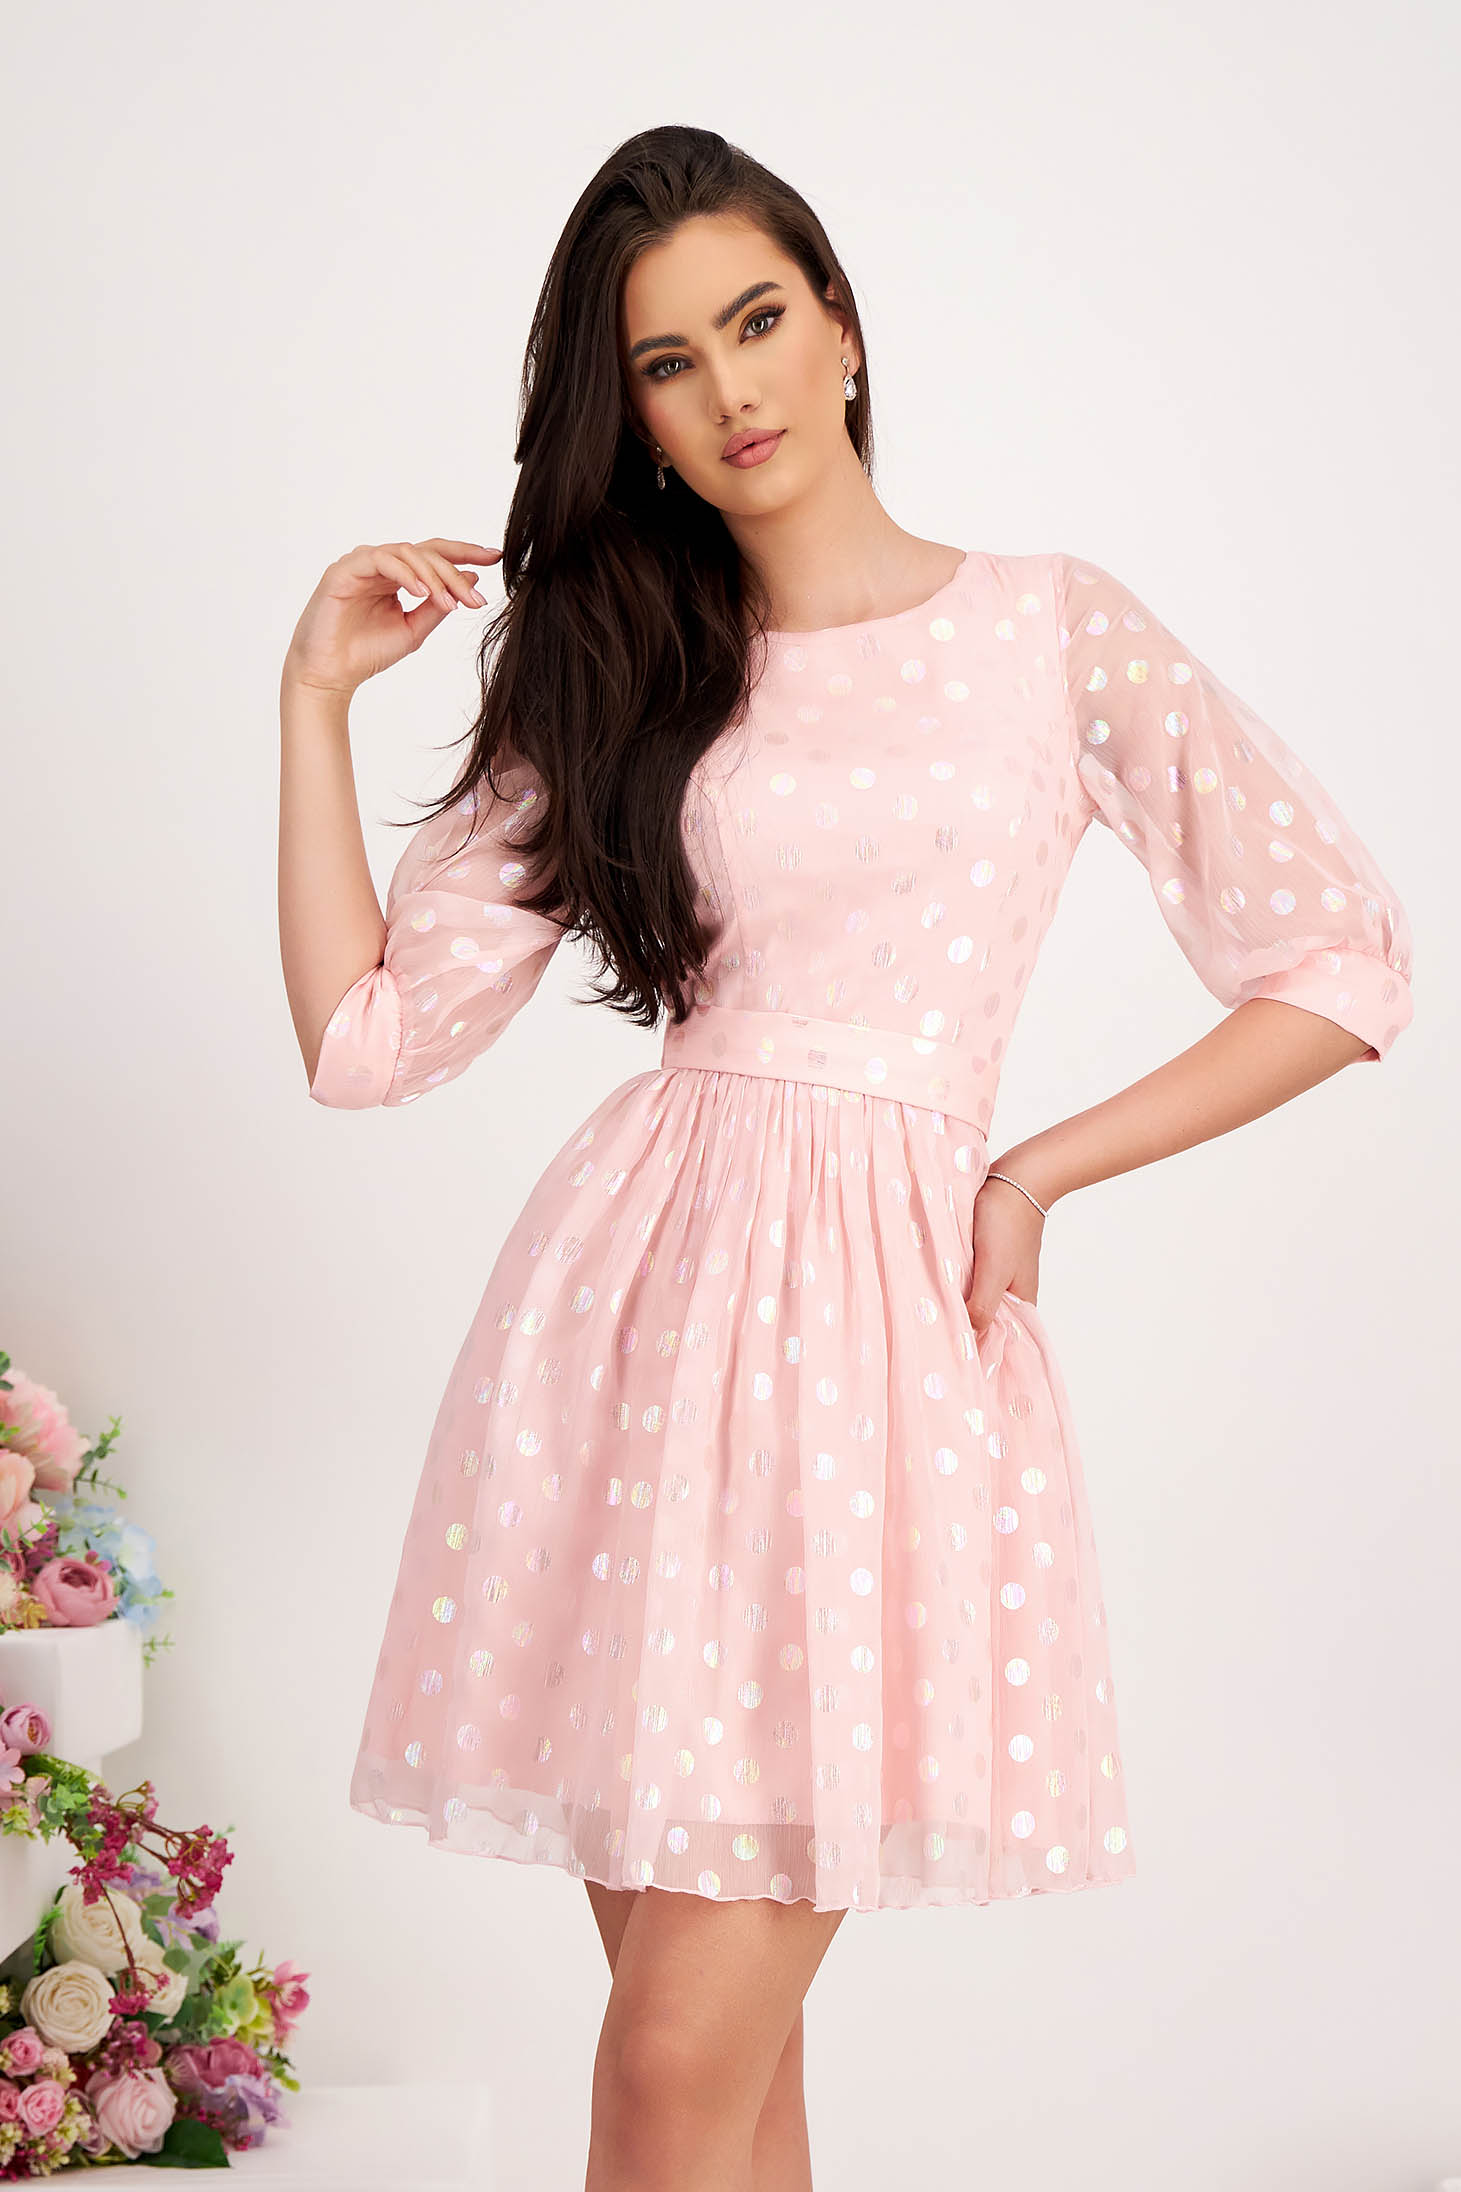 Powder Pink Veil Dress in A-line with Polka Dots Accessorized with Belt and Bow - StarShinerS